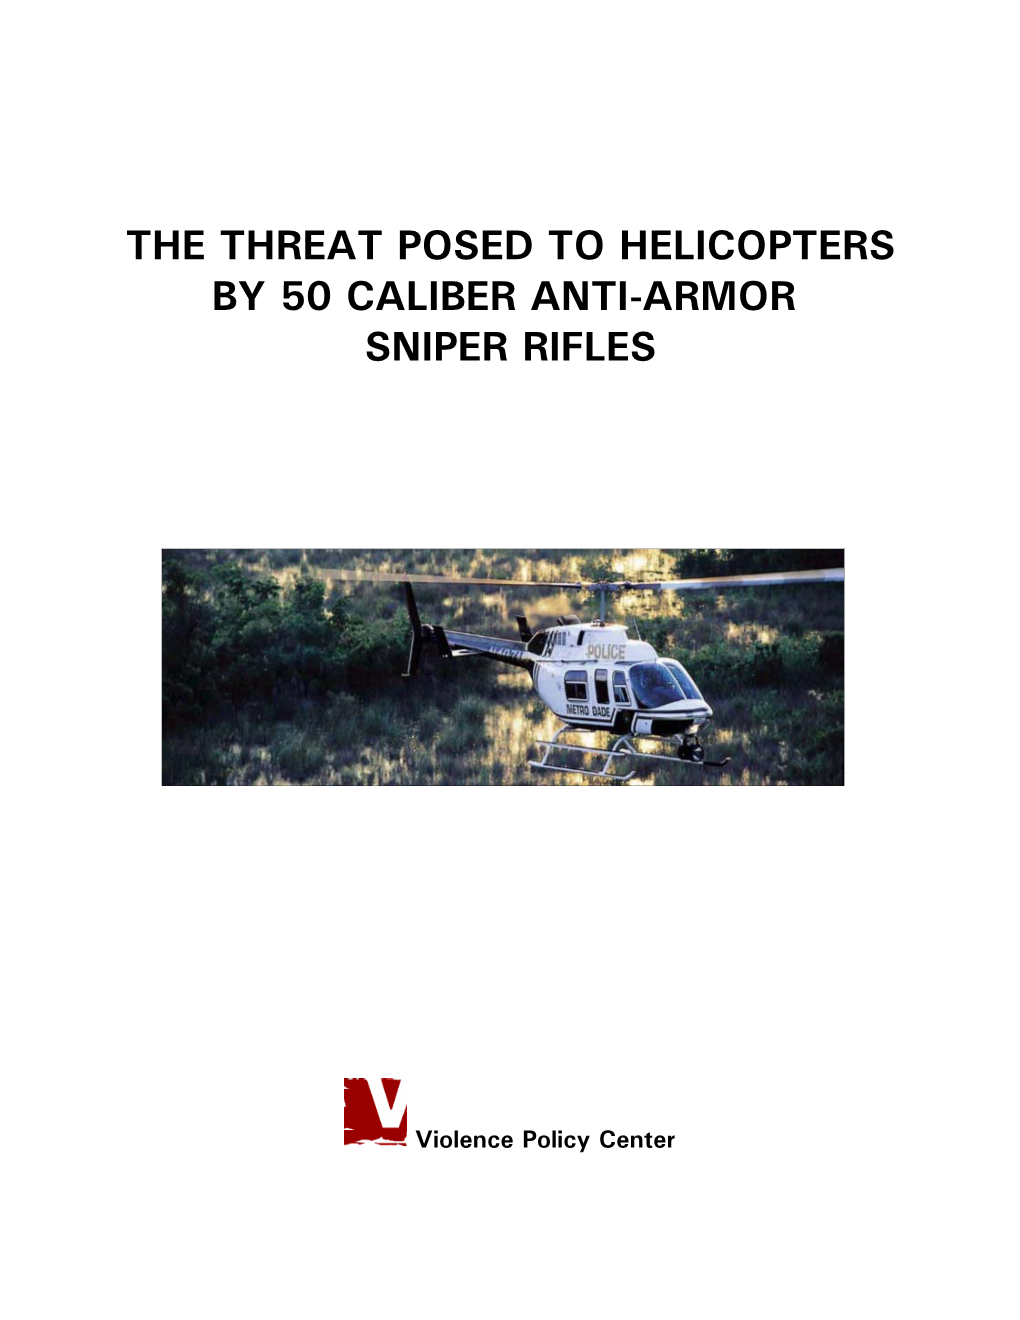 The Threat Posed to Helicopters by 50 Caliber Anti-Armor Sniper Rifles